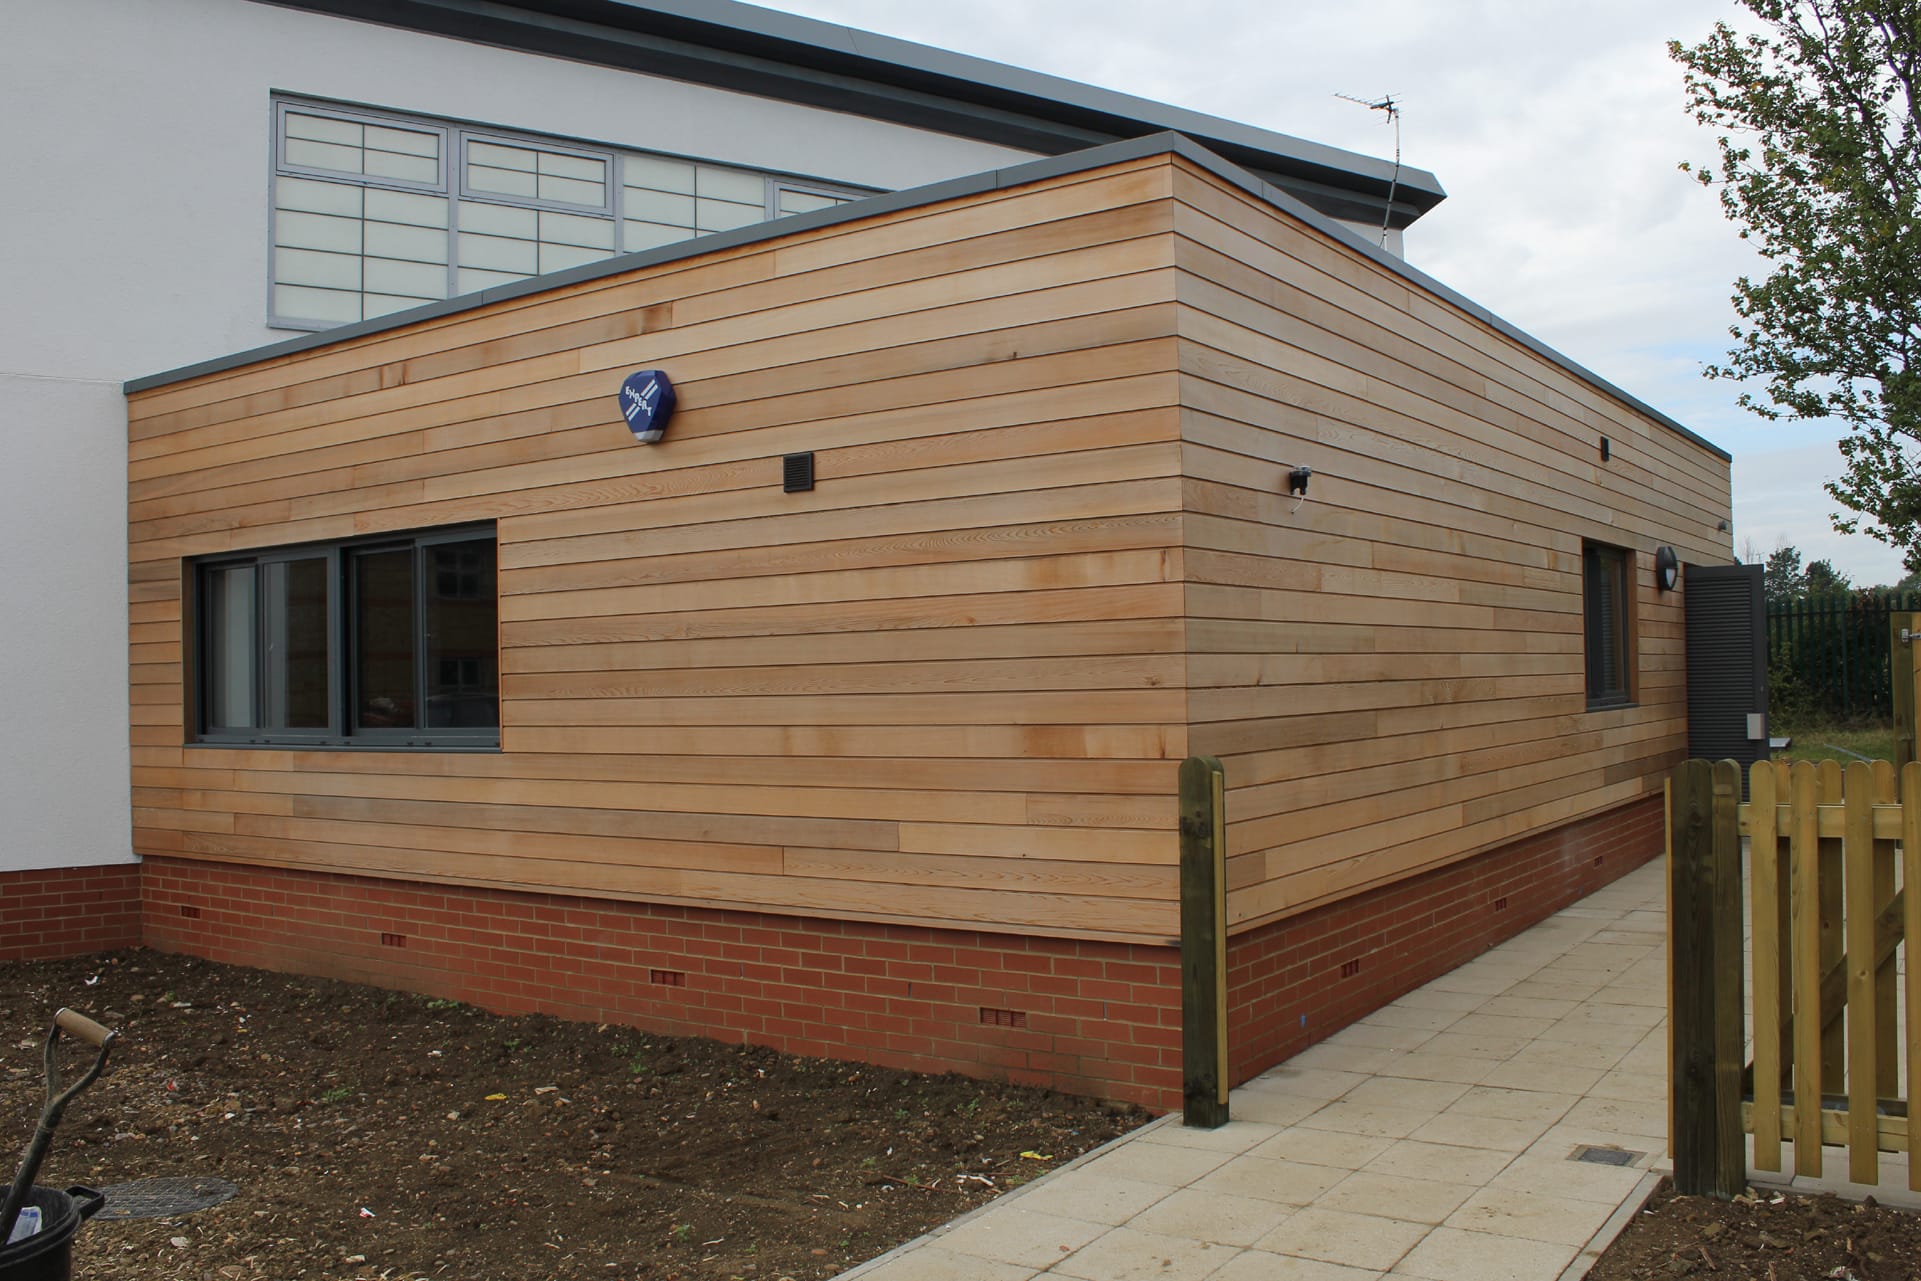 Ousedale School Newport Pagnell Eco design